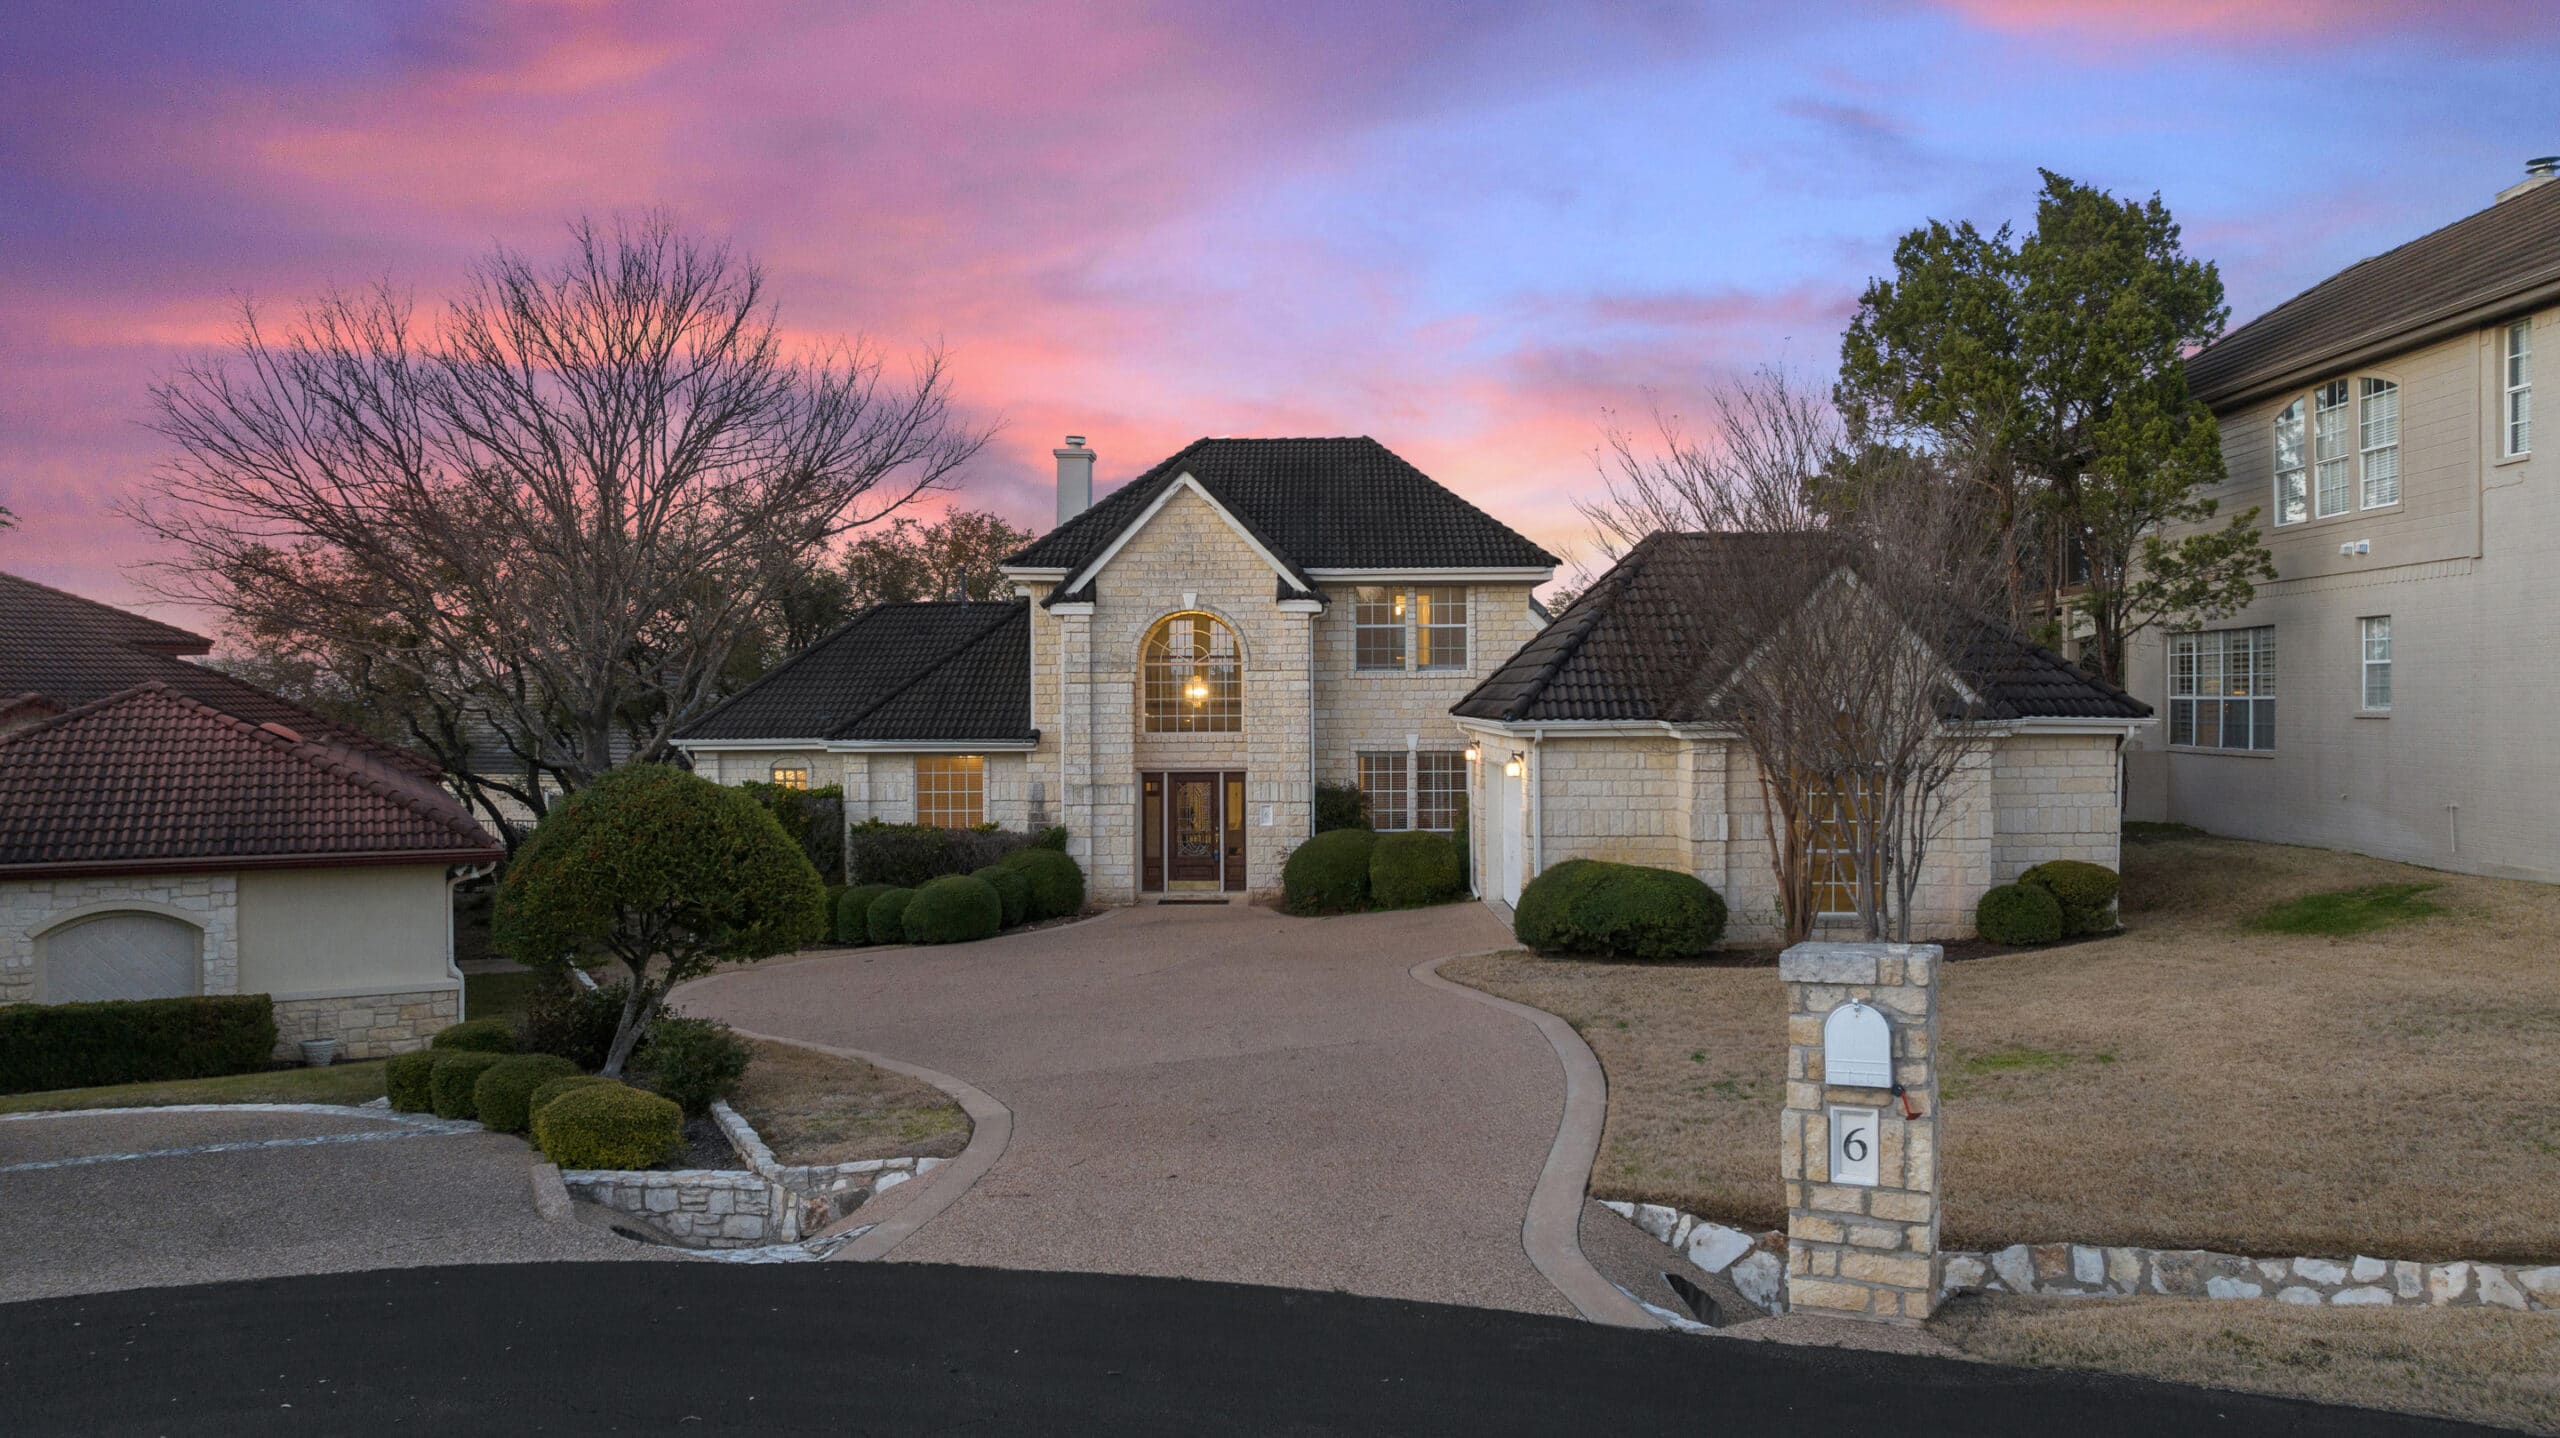 6 Dovedale Cove, The Hills, TX 78738